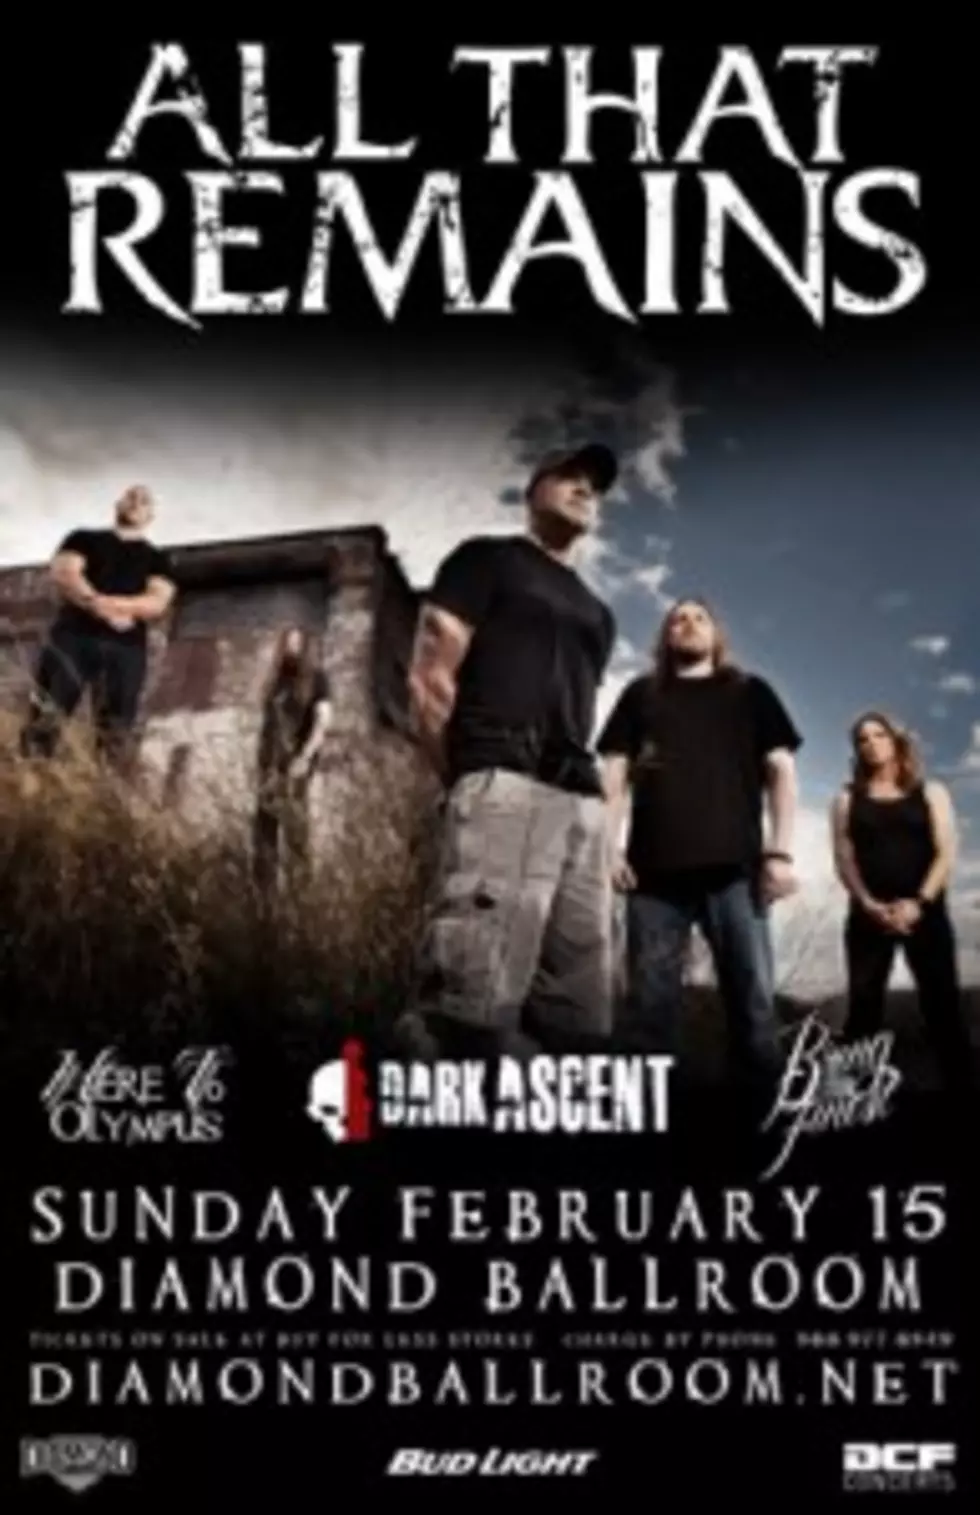 Enter to Win a Pair of Free Tickets to All That Remains!